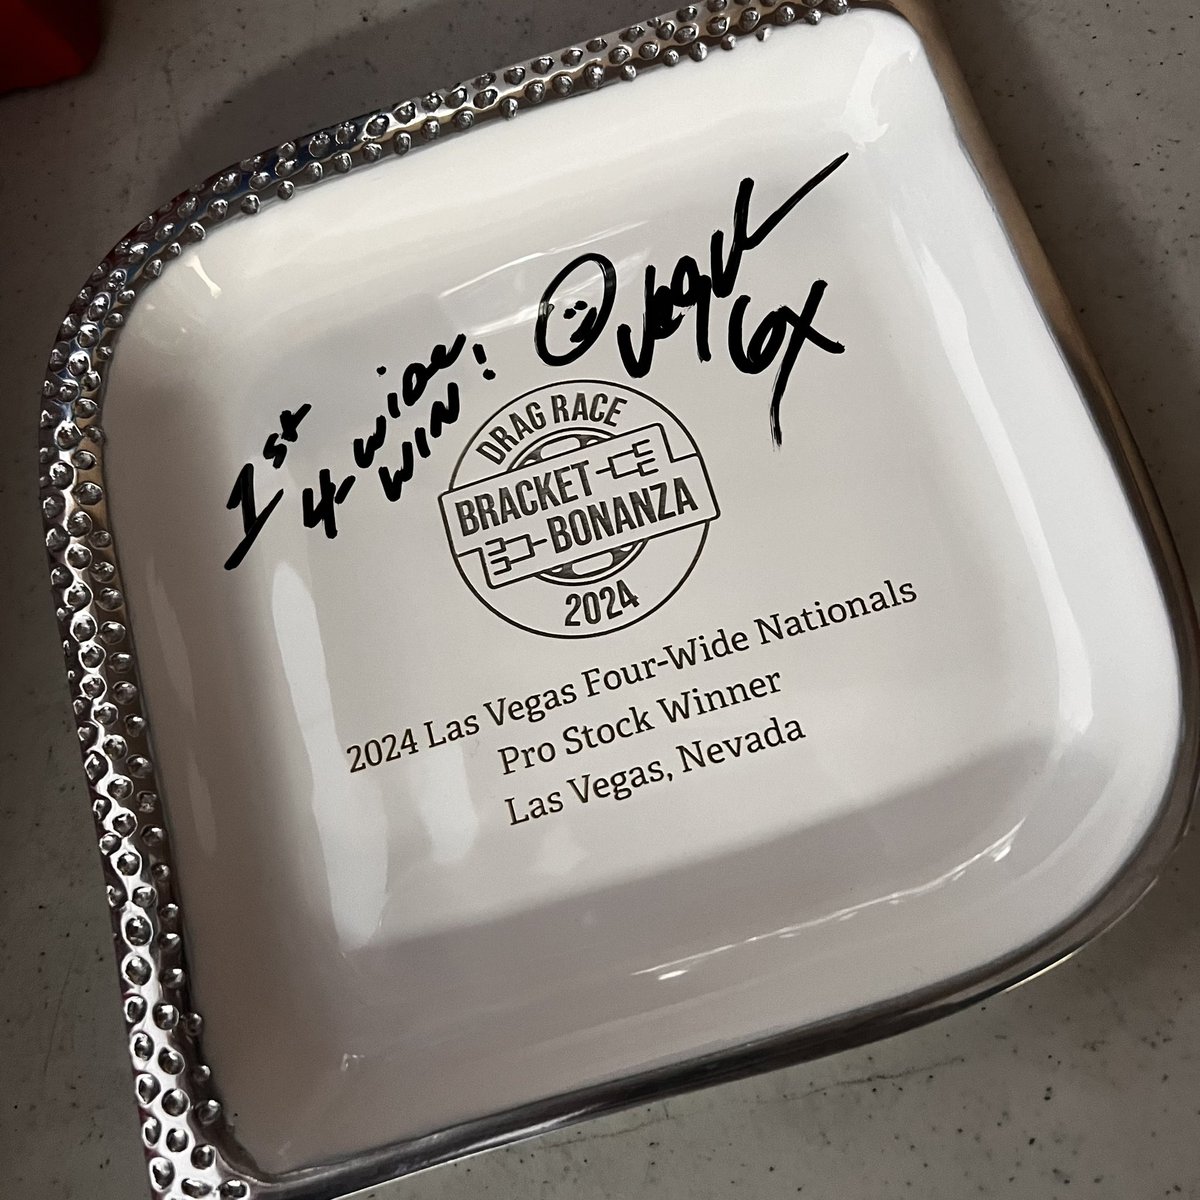 Check out these signed plaques from the @NHRA #Vegas4WideNats! We’re just 2 days away from brackets opening for the #4WideNats, where we’ll give out 5 more of these babies. Make sure you’re signed up to play our free bracket game! 🔥

DragRaceBracketBonanza.com